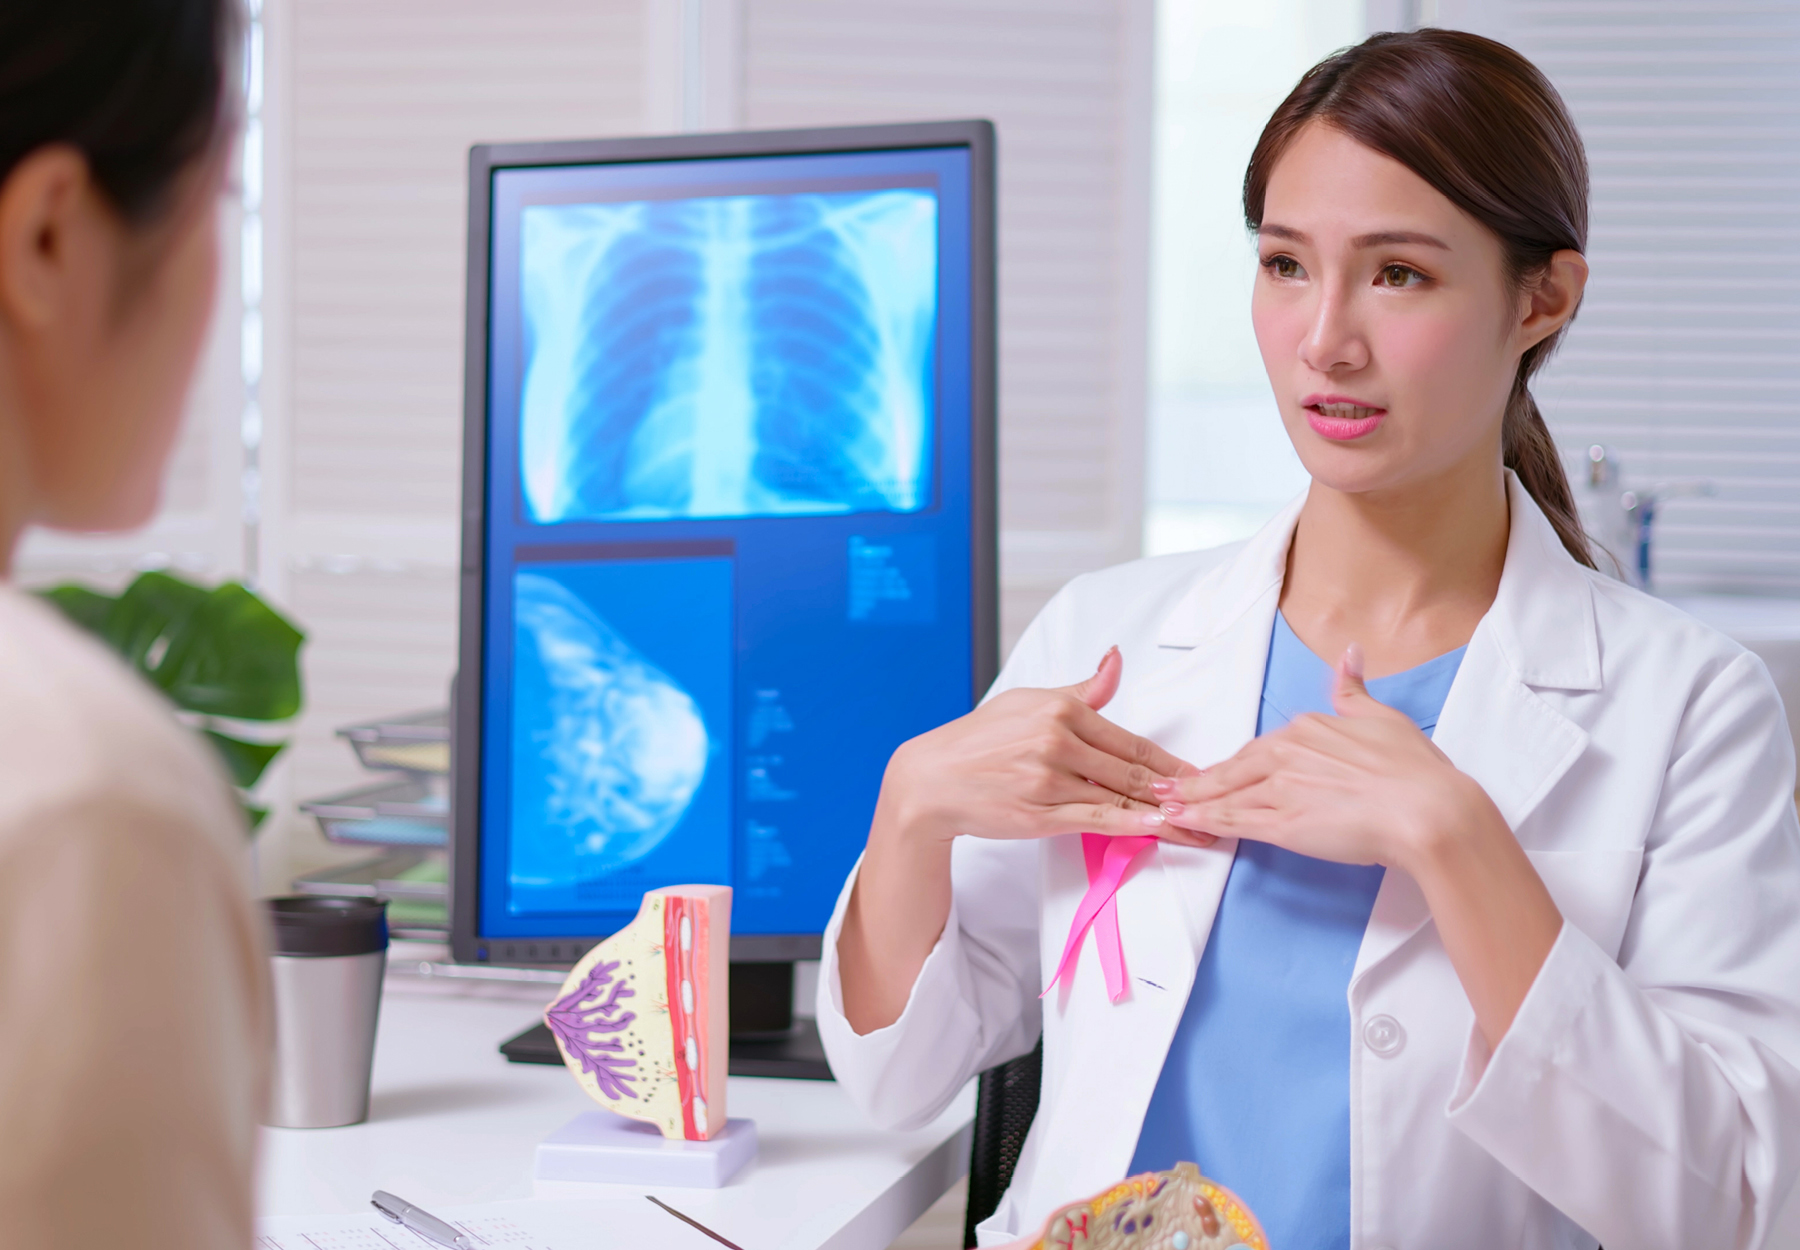 Female patient meeting with her female doctor about a breast examination. iStock image.